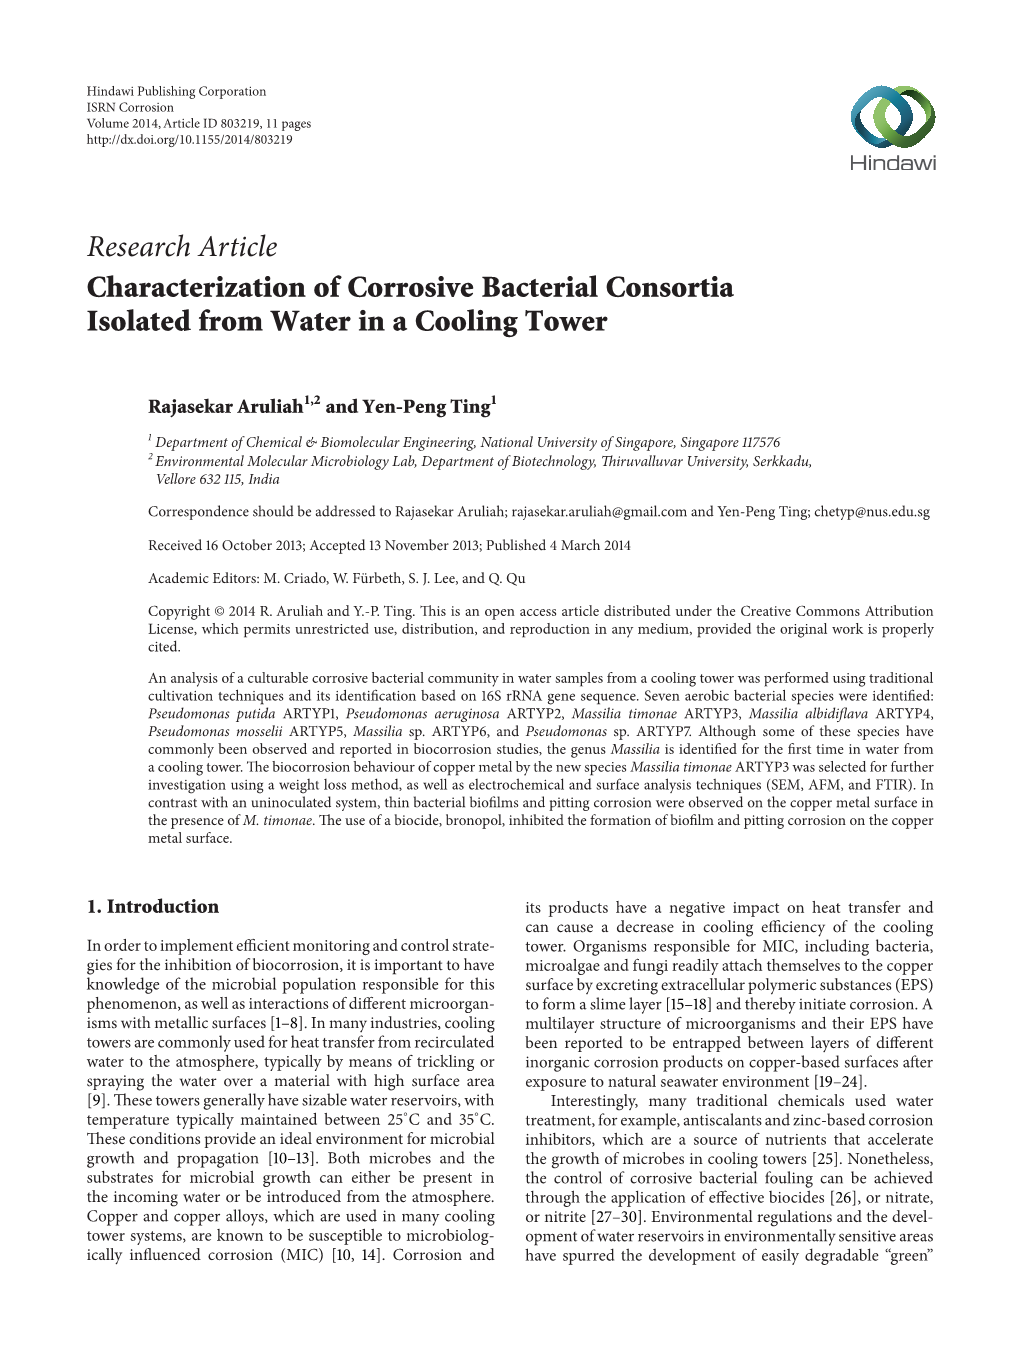 Characterization of Corrosive Bacterial Consortia Isolated from Water in a Cooling Tower